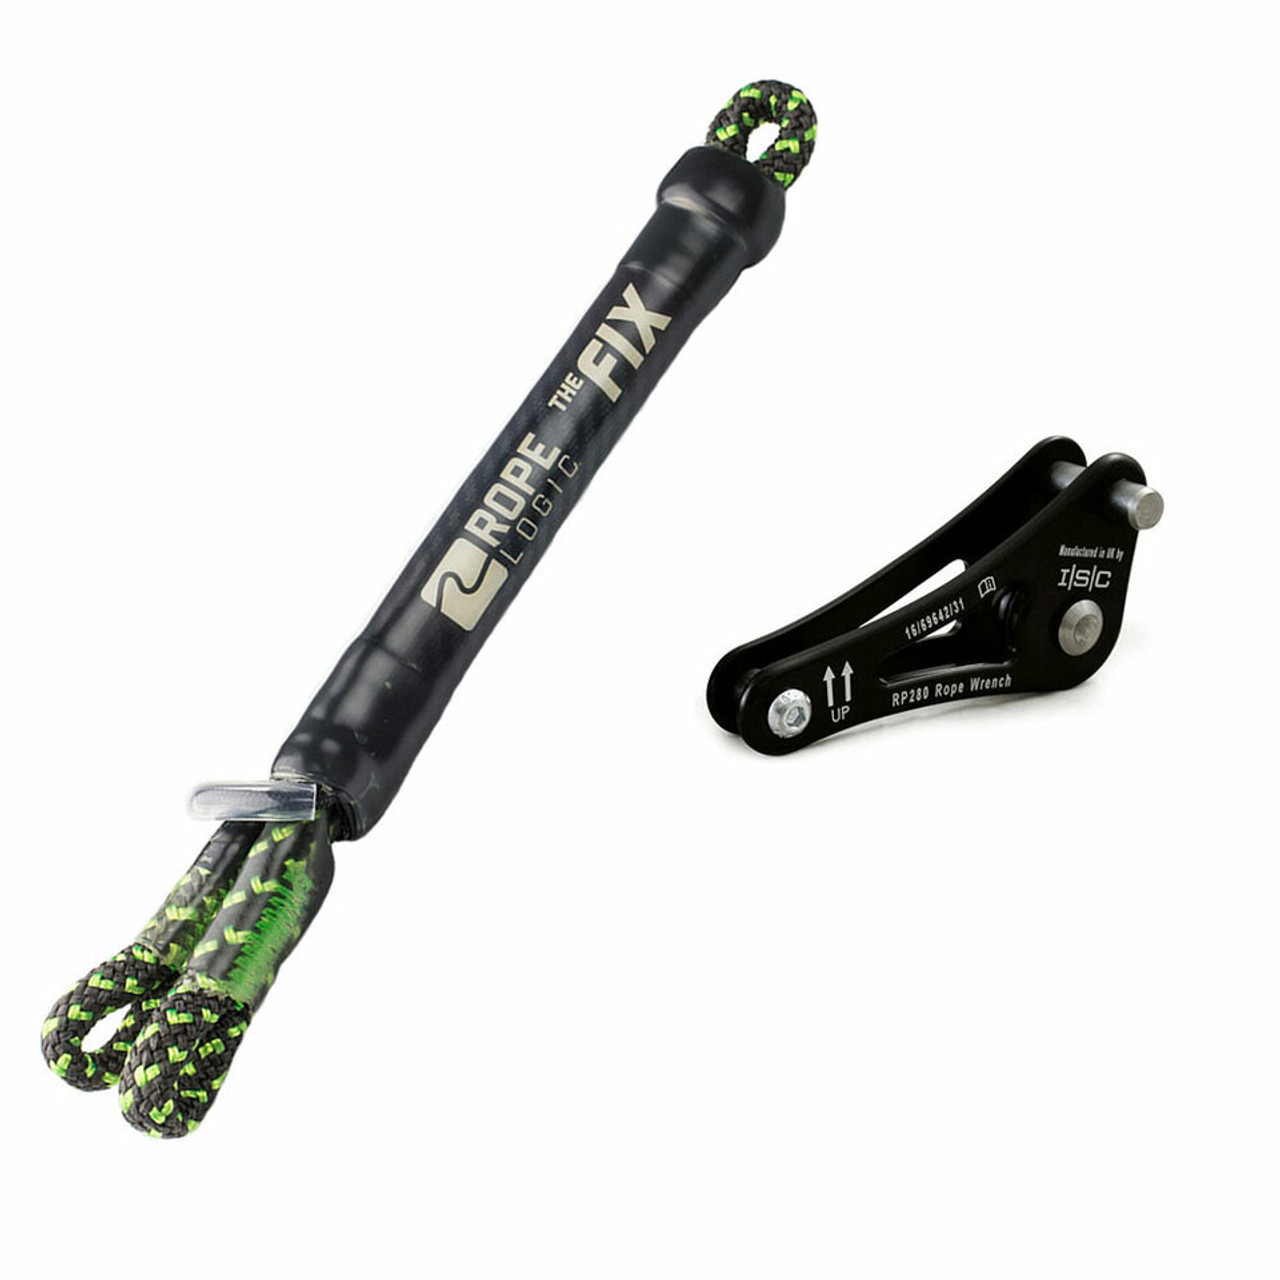 Notch Flow Adjustable Rope Wrench